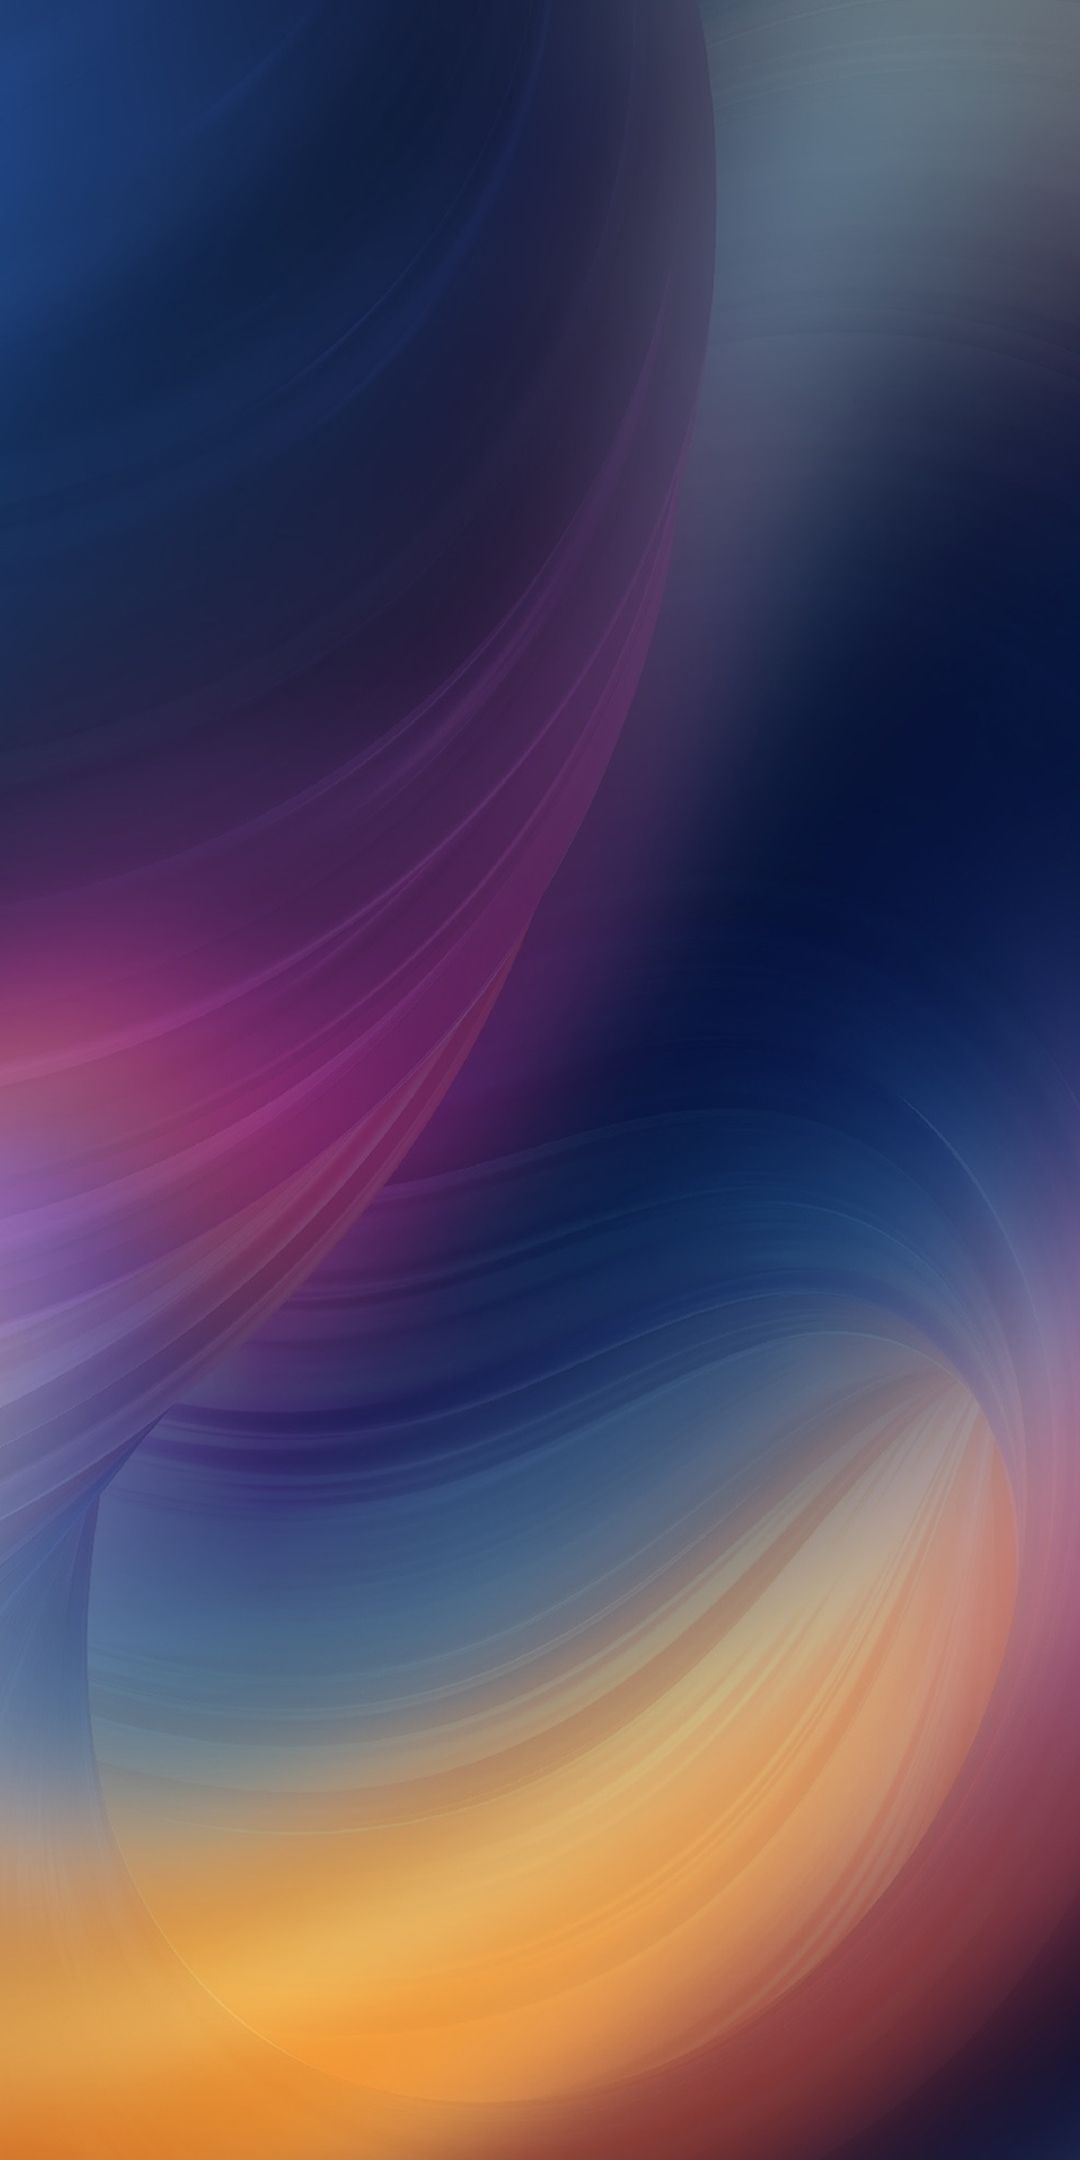 Huawei Mate Pro Wallpaper Of With Abstract Light Dreamy